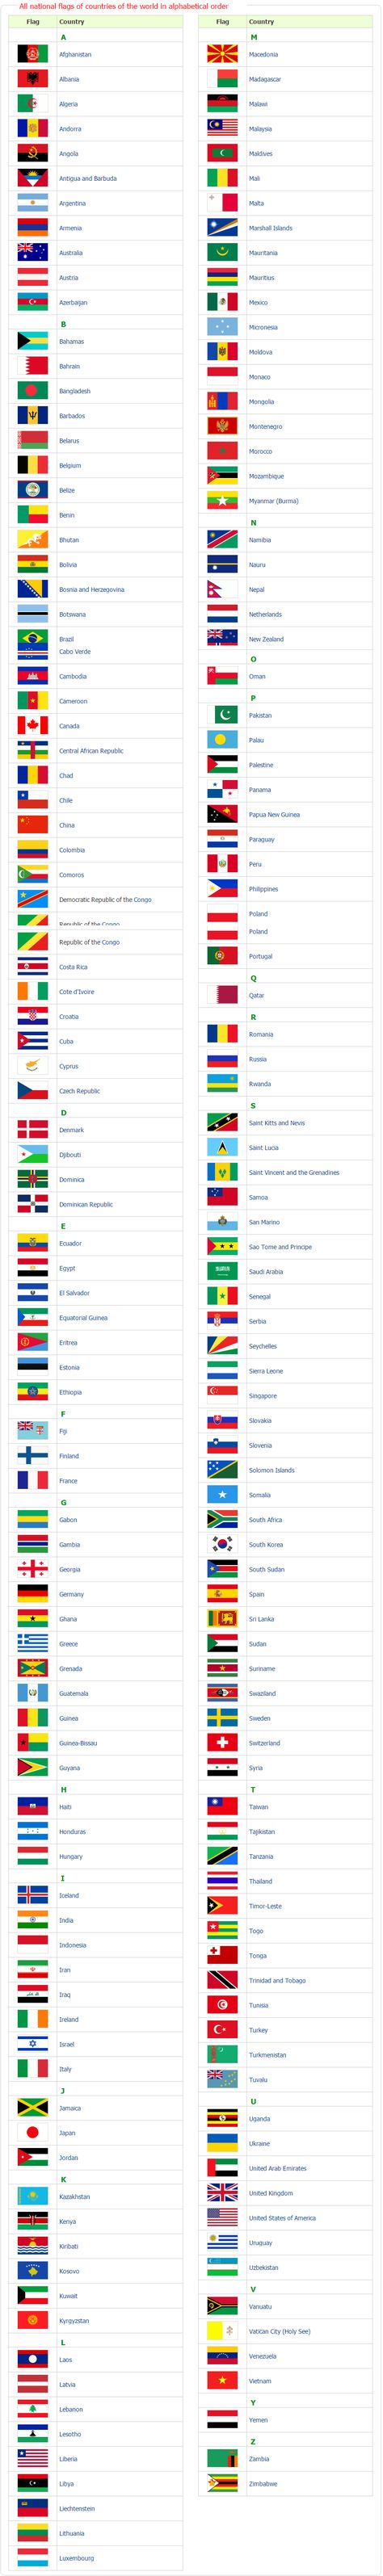 Country flags of the world with images and names All World Flags With Names, World Flags With Names And Capitals, Flags Of The World With Names, World Flags With Names Printable, 195 Flags Of The World, All Flags Of The World With Names, How Many Countries In The World, All Countries Flag With Name, All Country Flags With Name